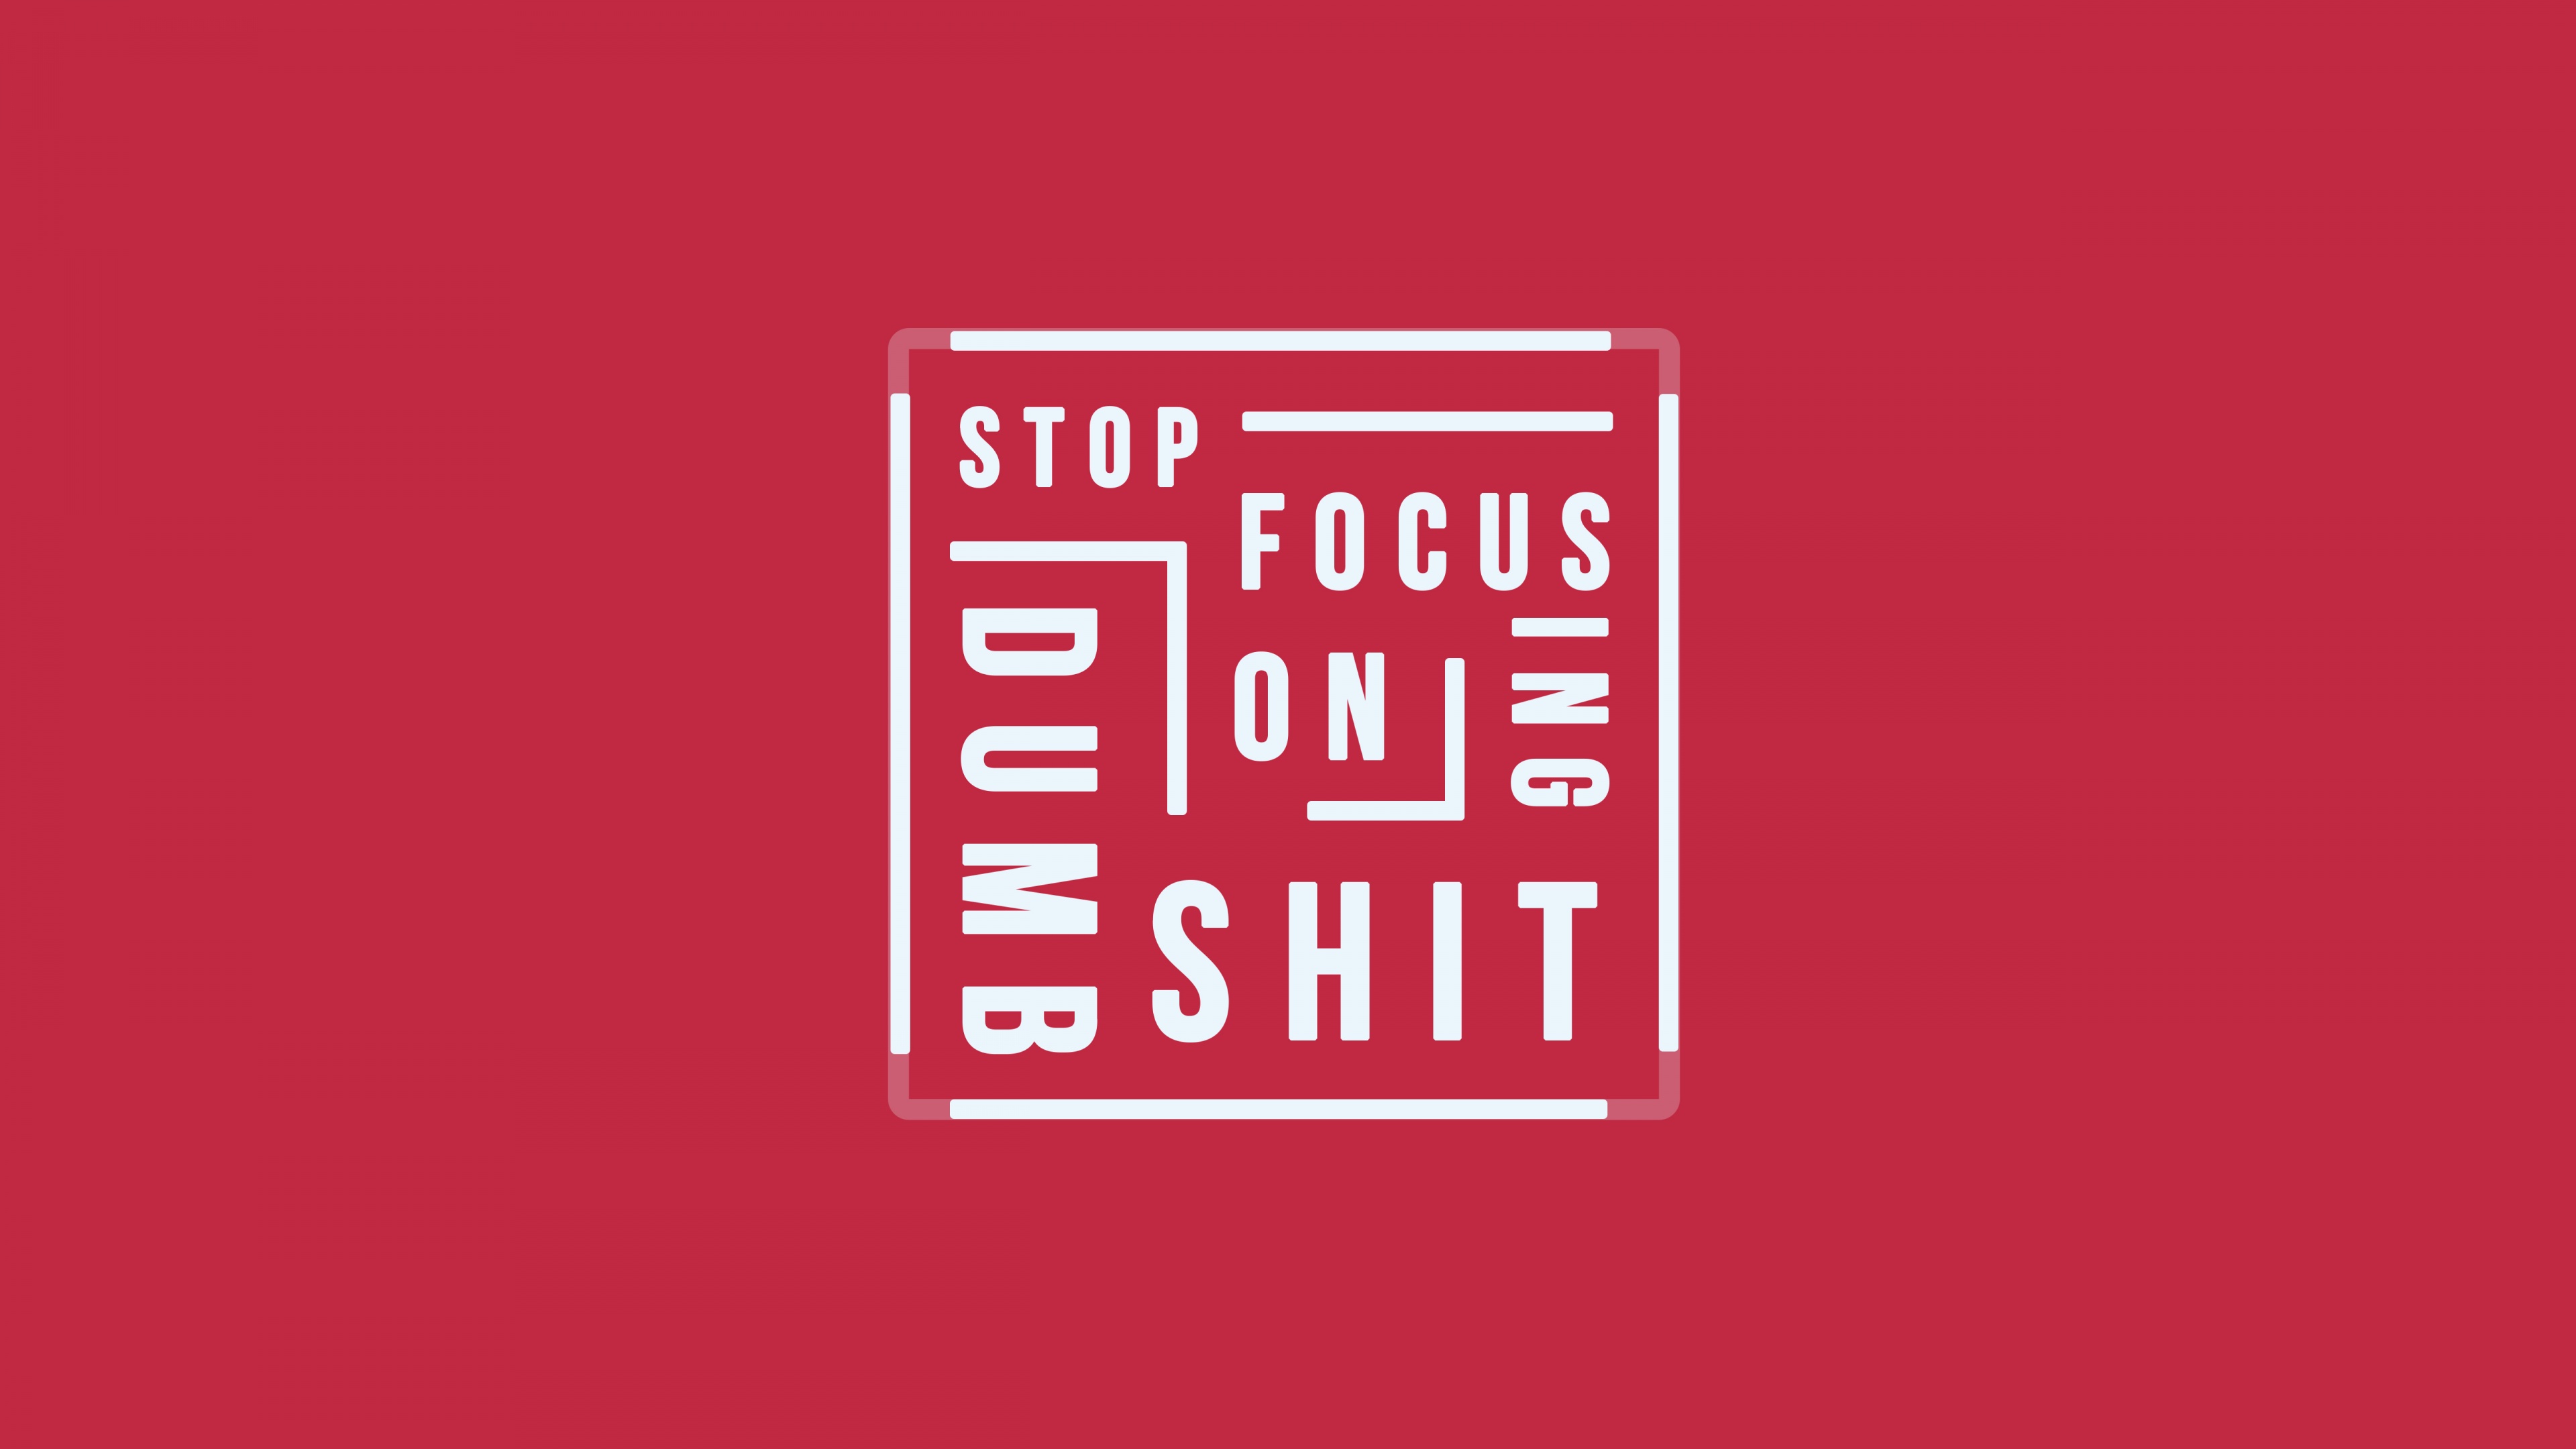 Stop focusing on Dumb Shit Wallpaper 4K, Popular quotes, Quotes, #2010